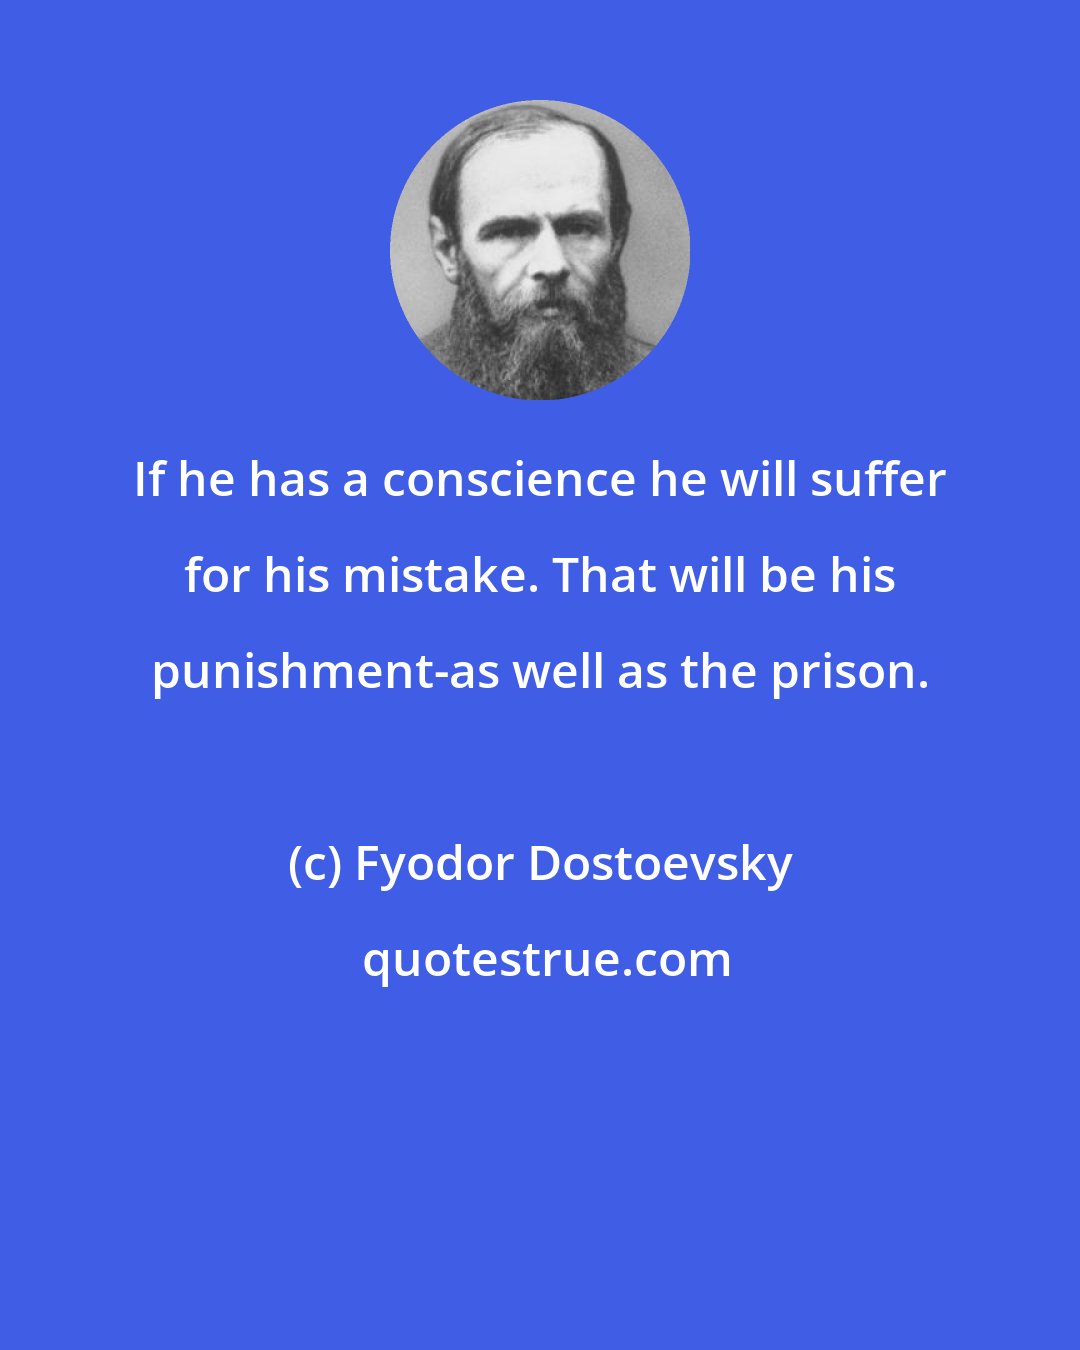 Fyodor Dostoevsky: If he has a conscience he will suffer for his mistake. That will be his punishment-as well as the prison.